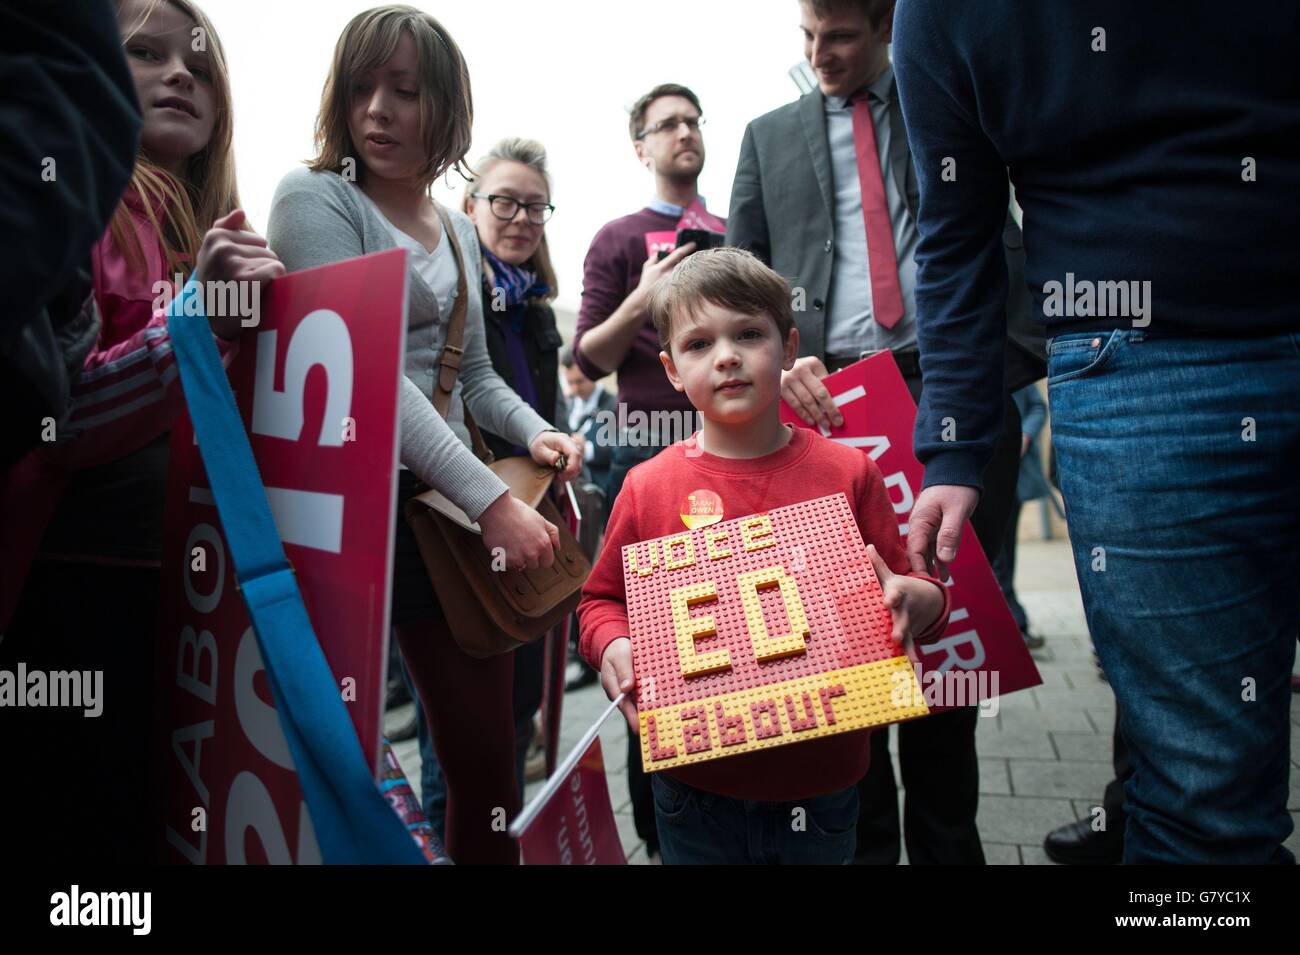 Four-year-old Dudley Idle from Maidstone shows his support for Labour leader Ed Miliband at Sussex Coast College in Hastings, where he watched the opposition leader address Labour supporters. Stock Photo